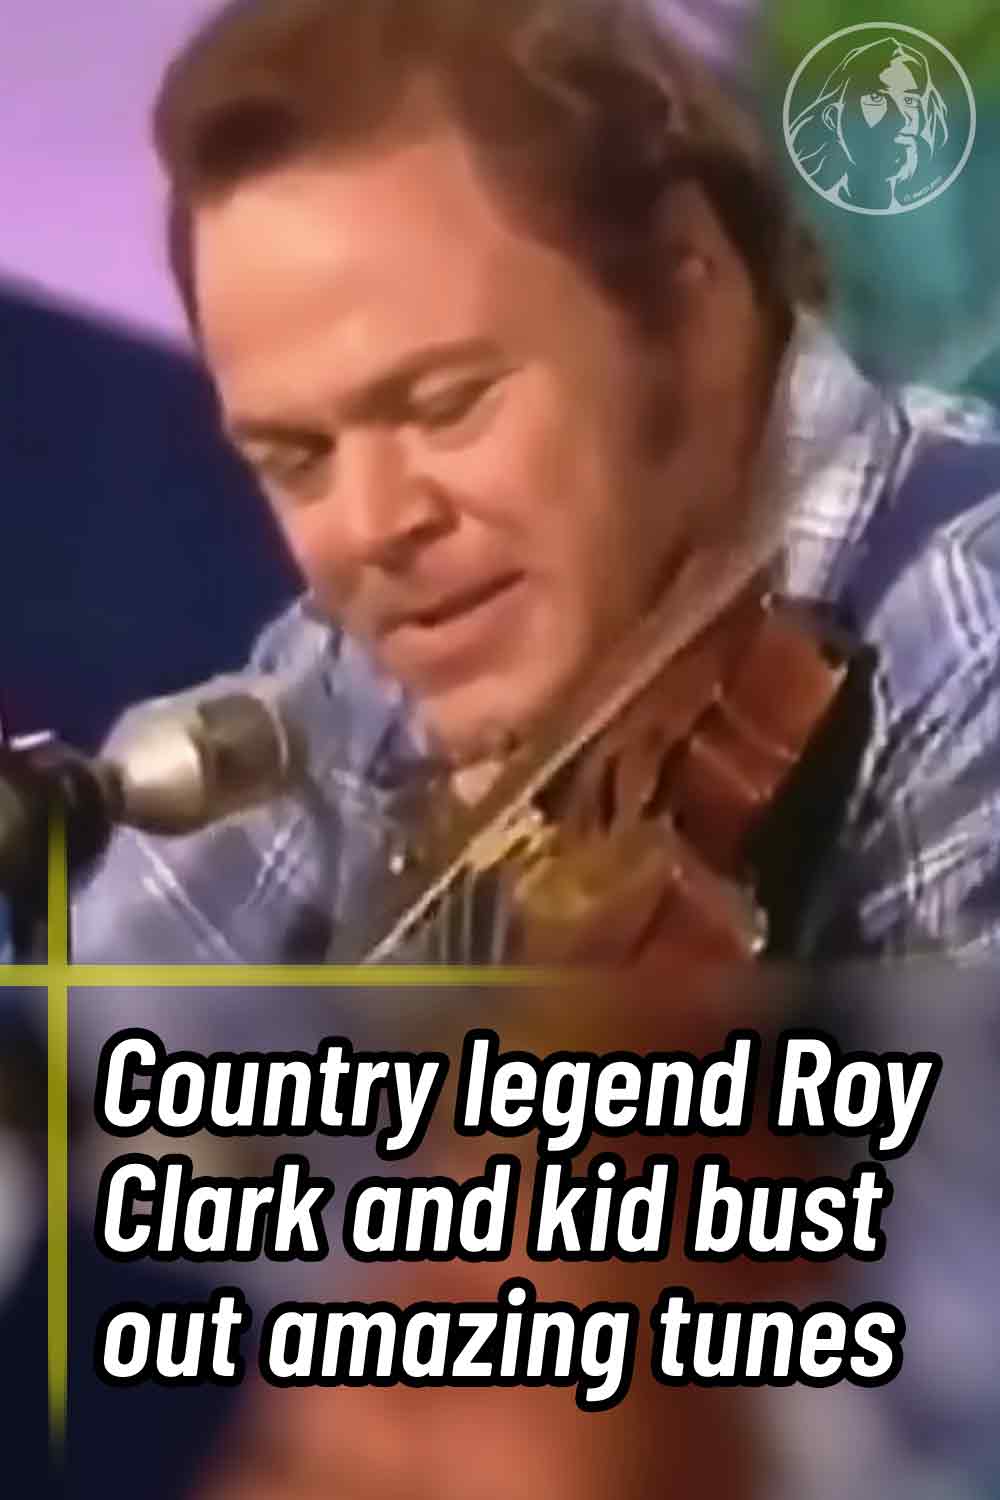 Country legend Roy Clark and kid bust out amazing tunes - WWJD